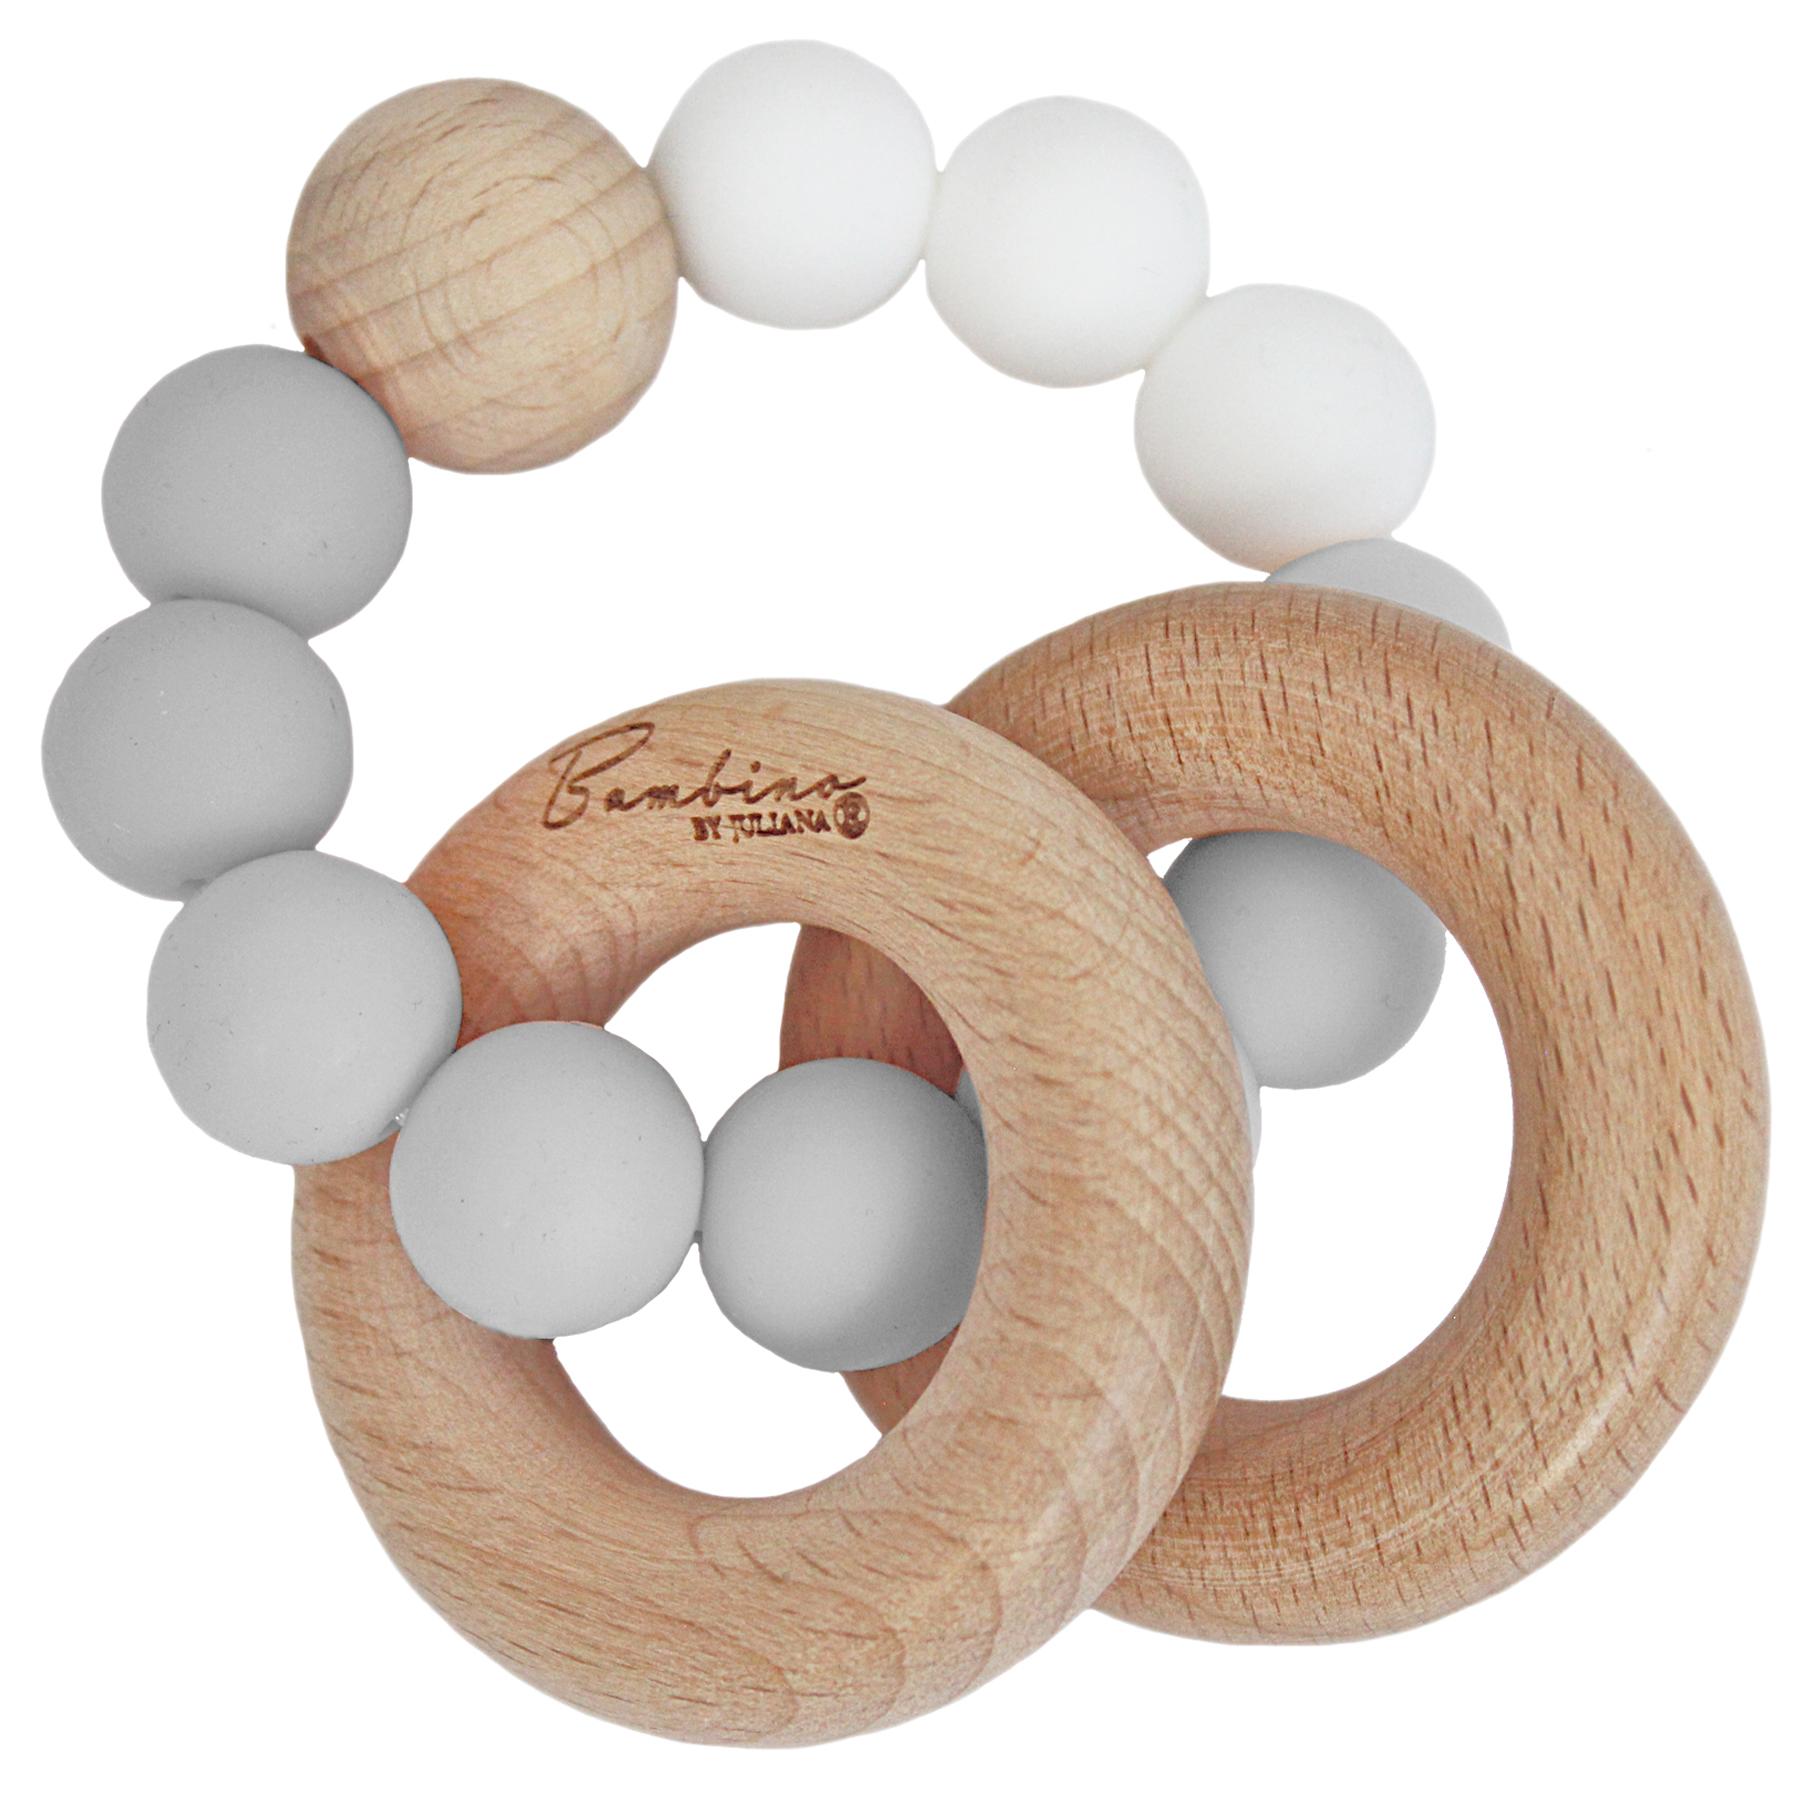 Bambino by Juliana® Wooden Rings & Grey Silicone Beads Teether